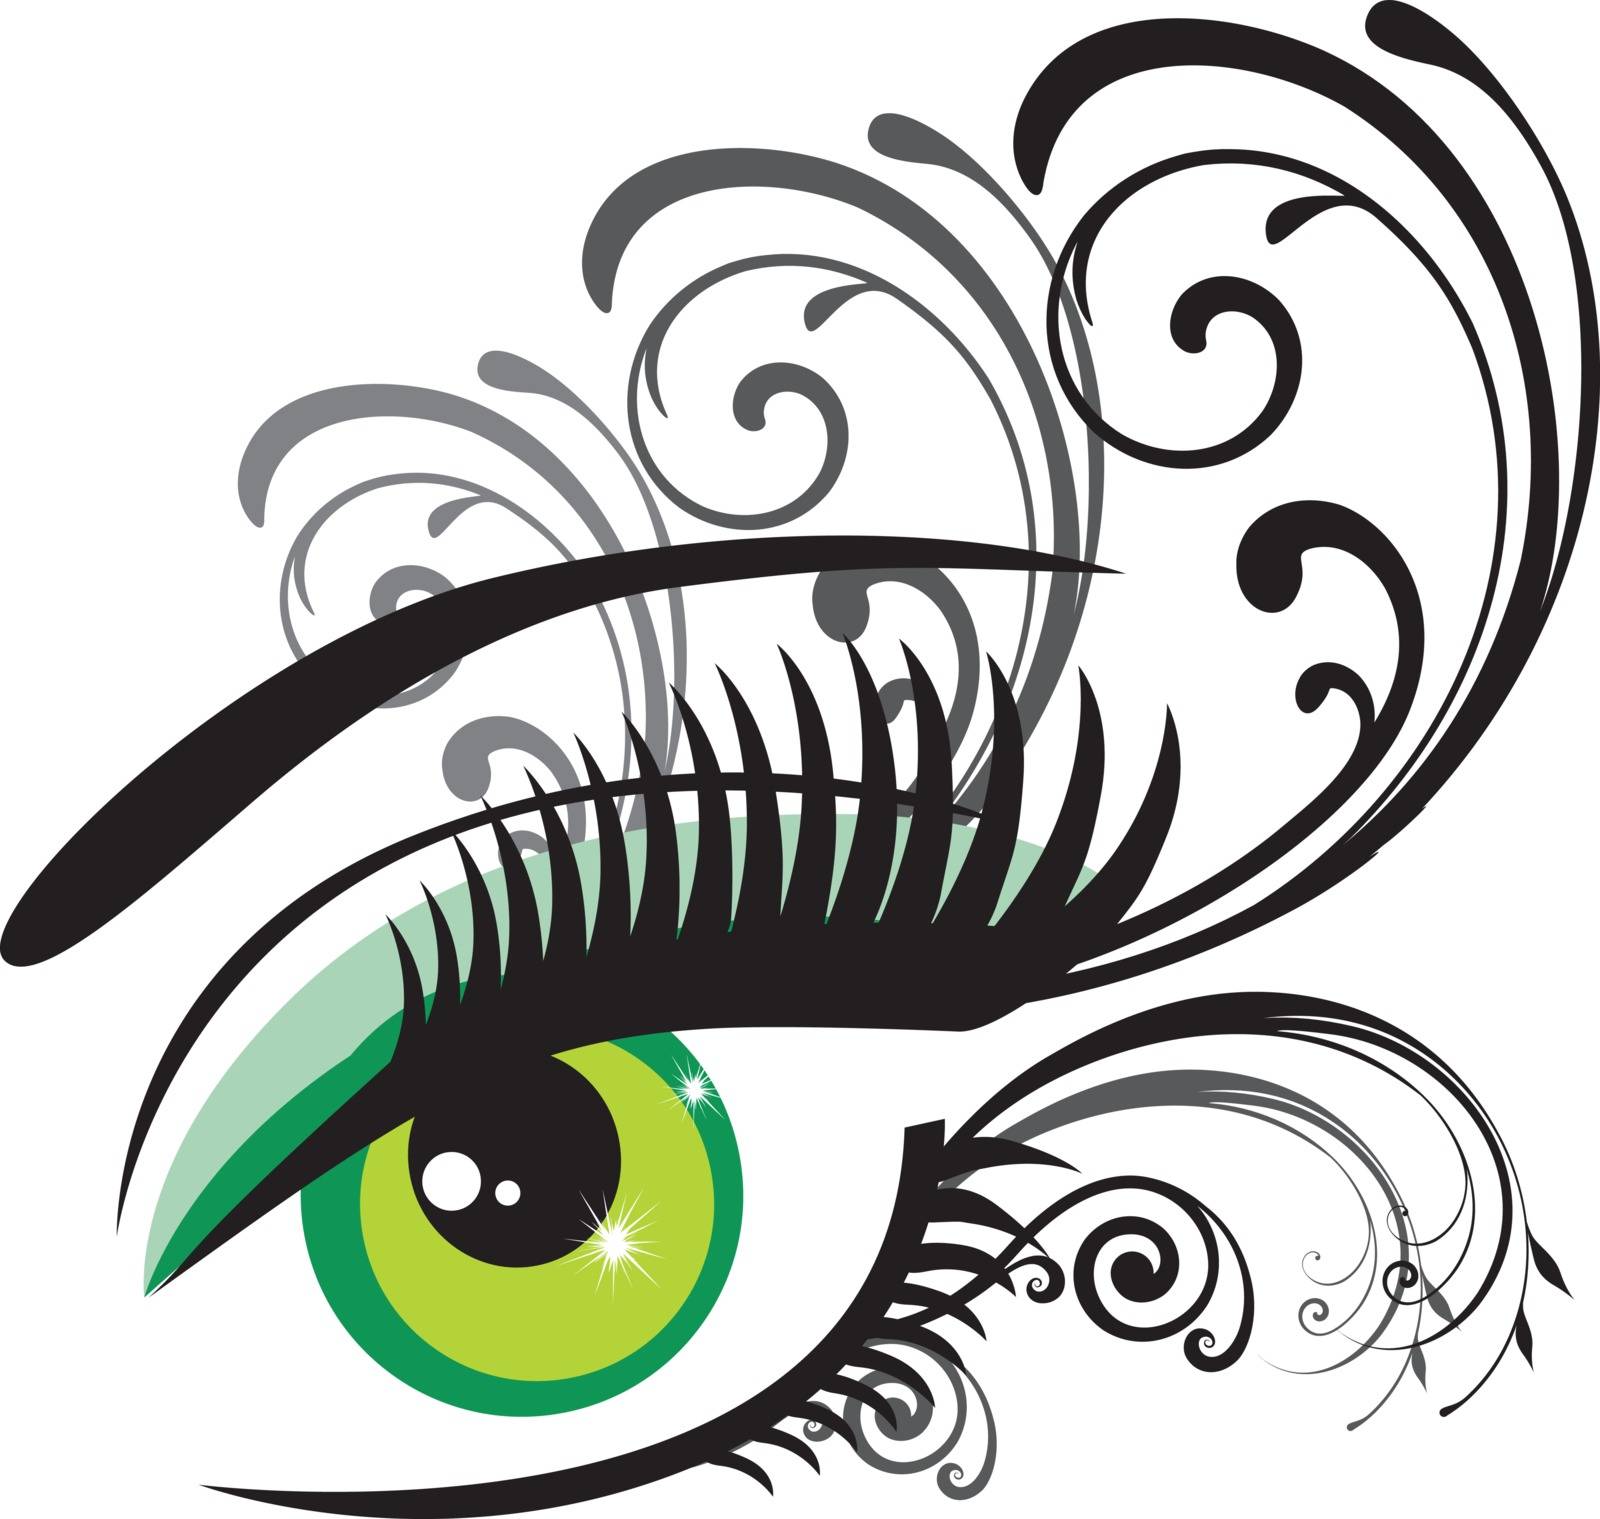 vector illustration of a green eye with swirls